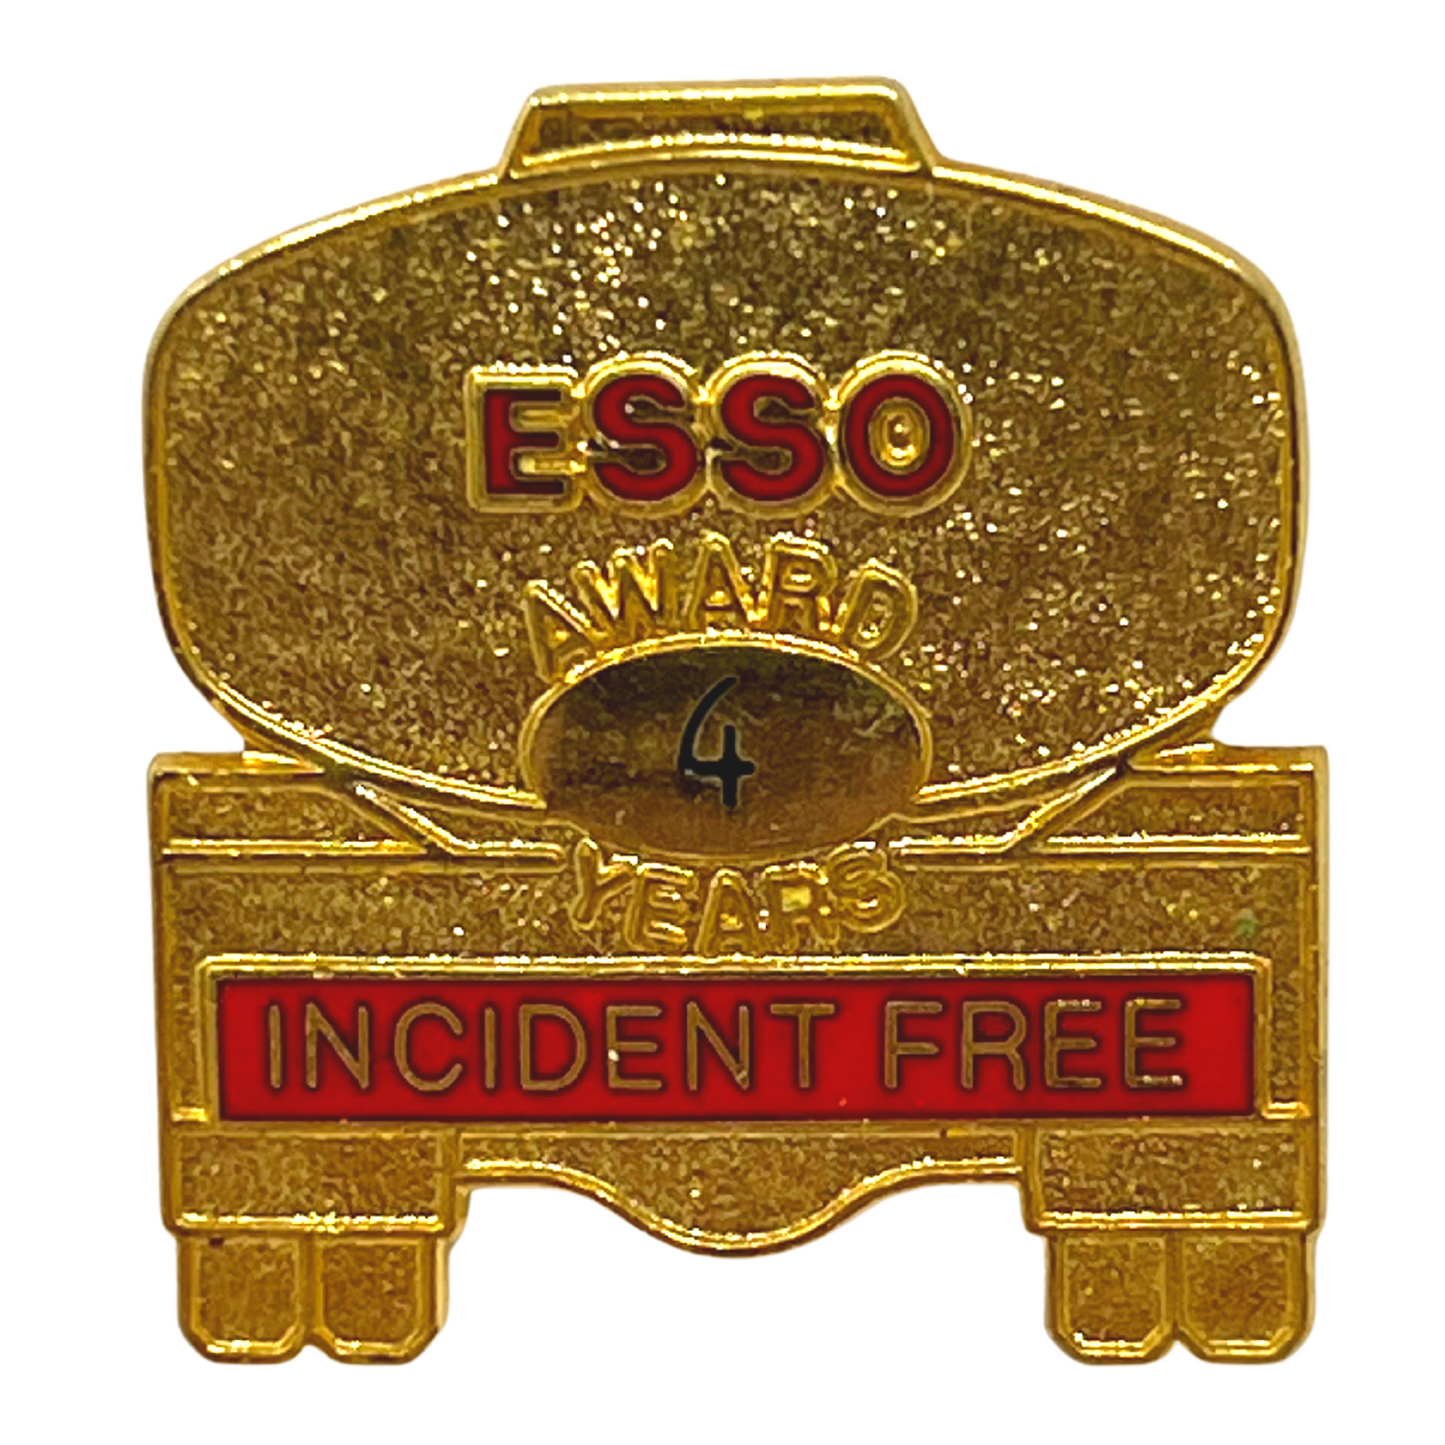 Esso Incident Free Award 4 Year Gas & Oil Lapel Pin